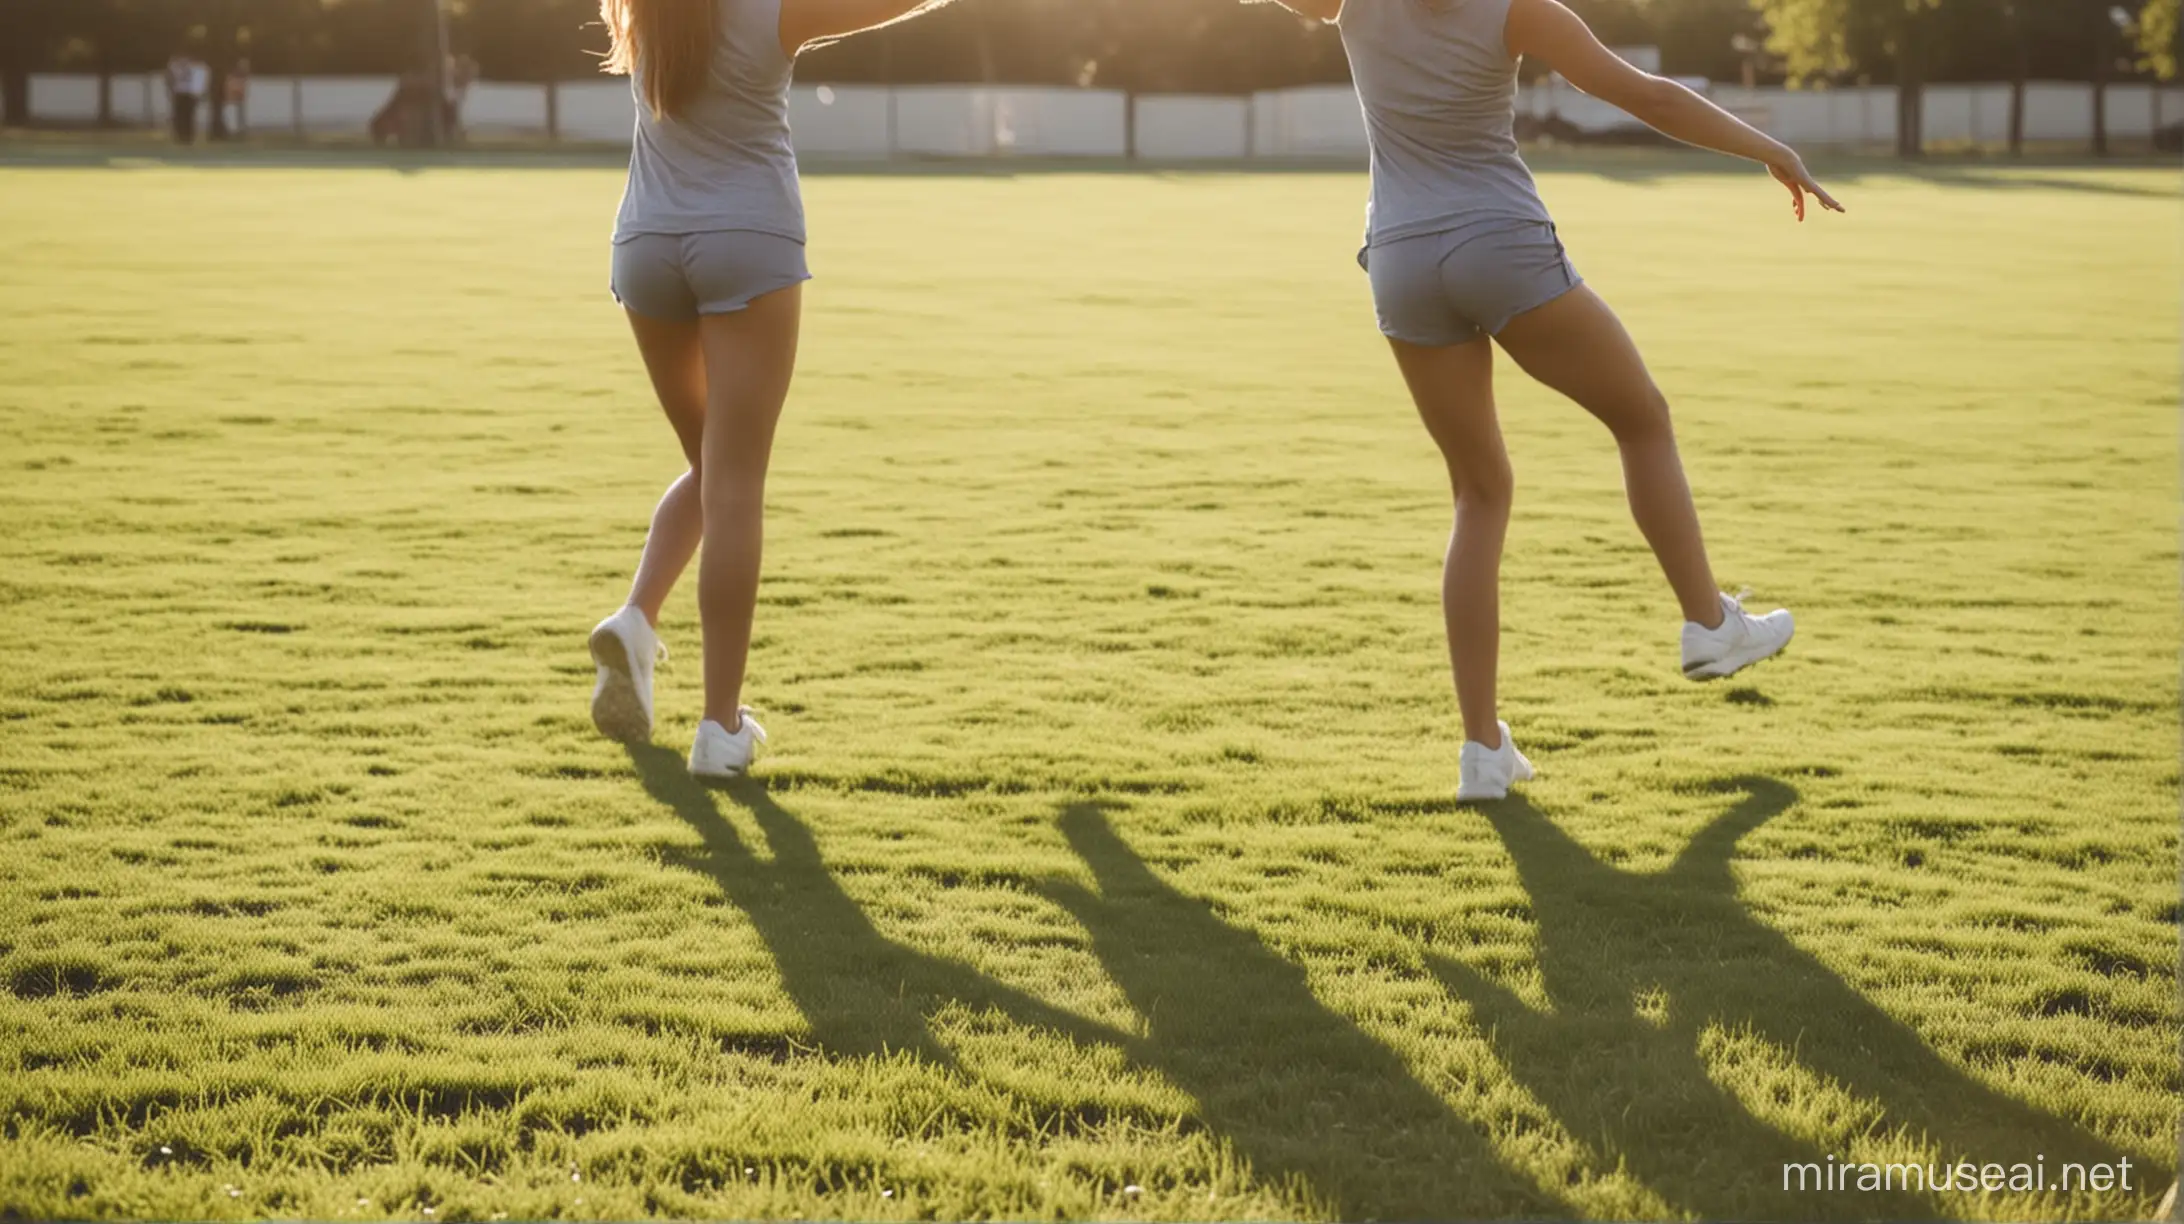 Blurred image of Girls stretching on the field